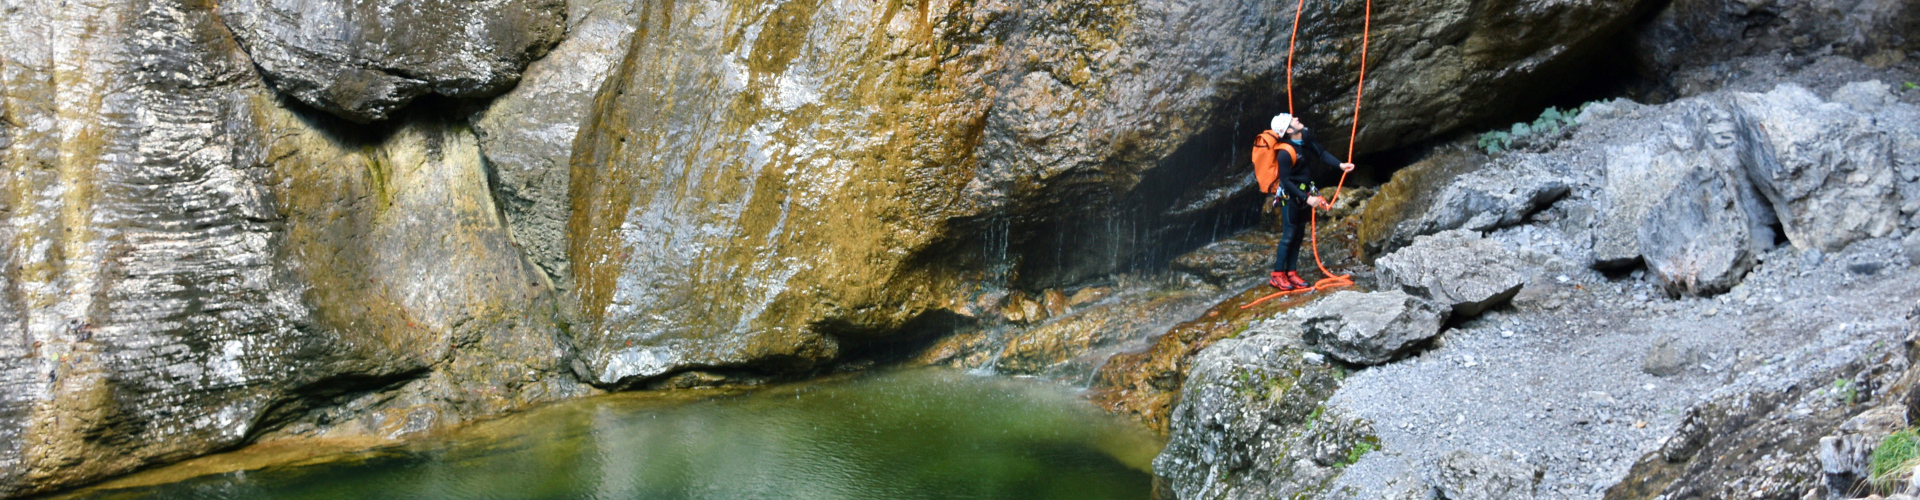 Canyoning Privatführung